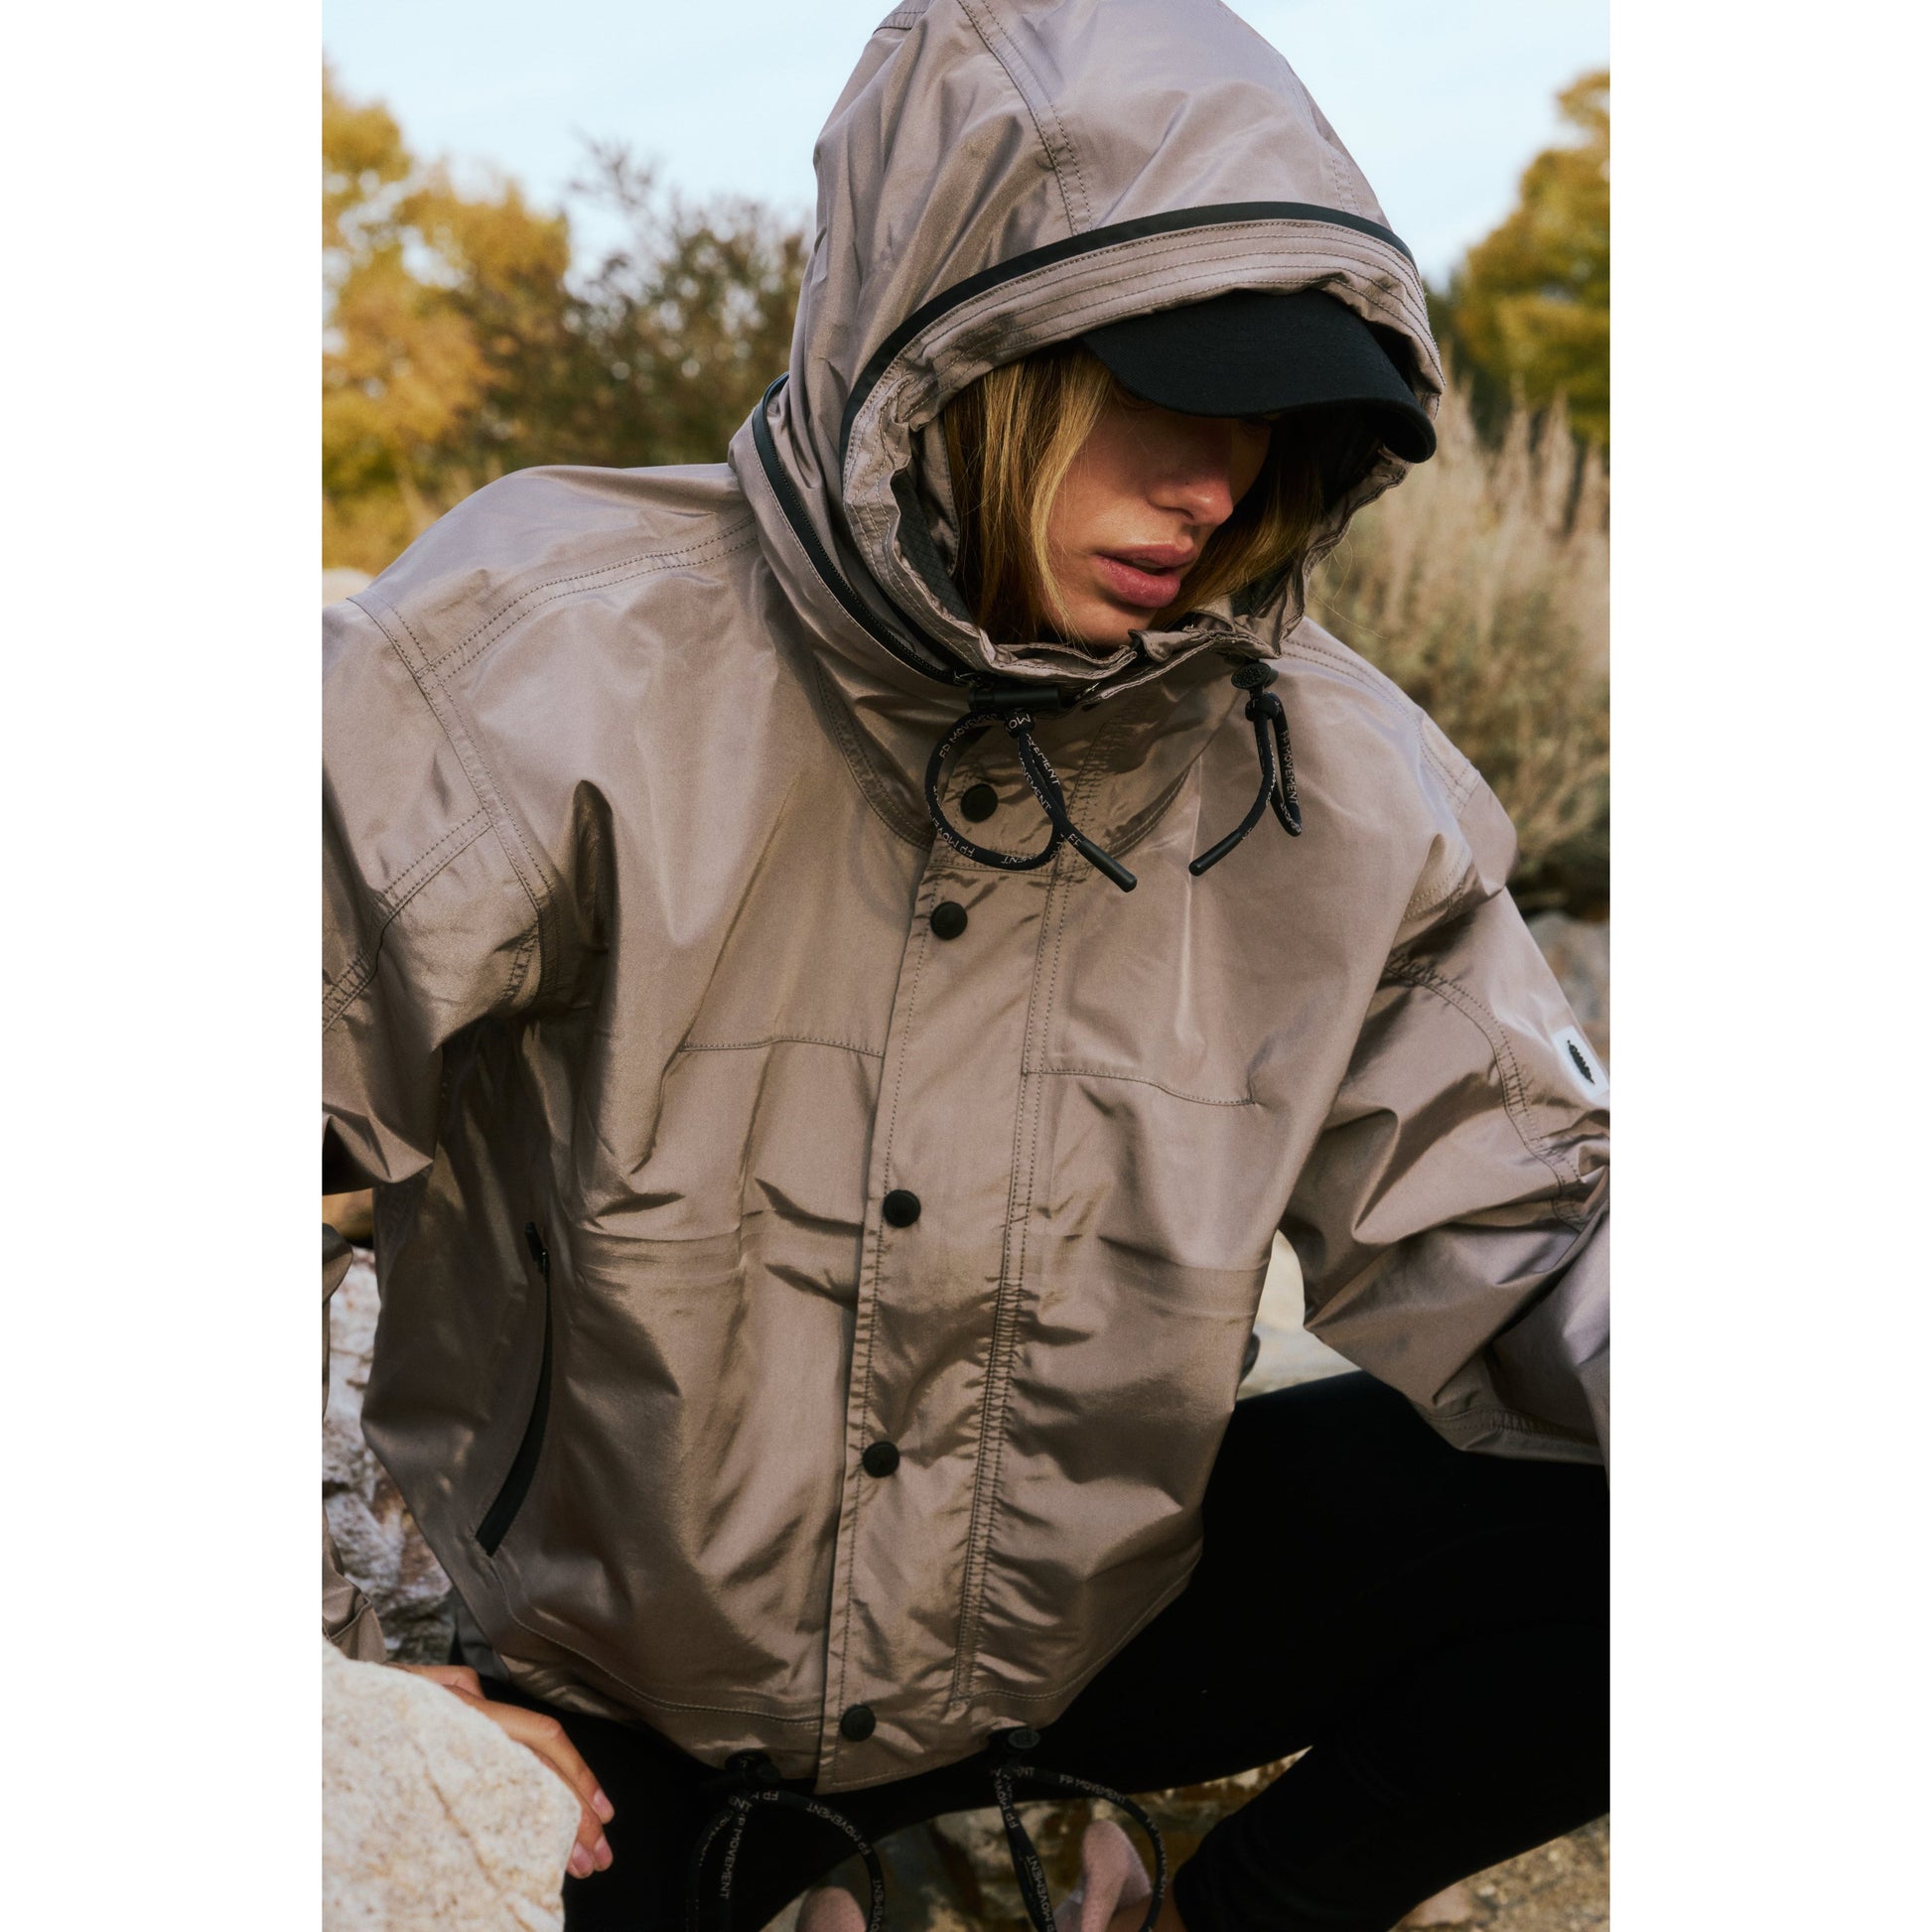 A person in a hooded beige Rain & Shine Jacket by Nordic Trail crouching among rocks, partially covering their face with the hood.